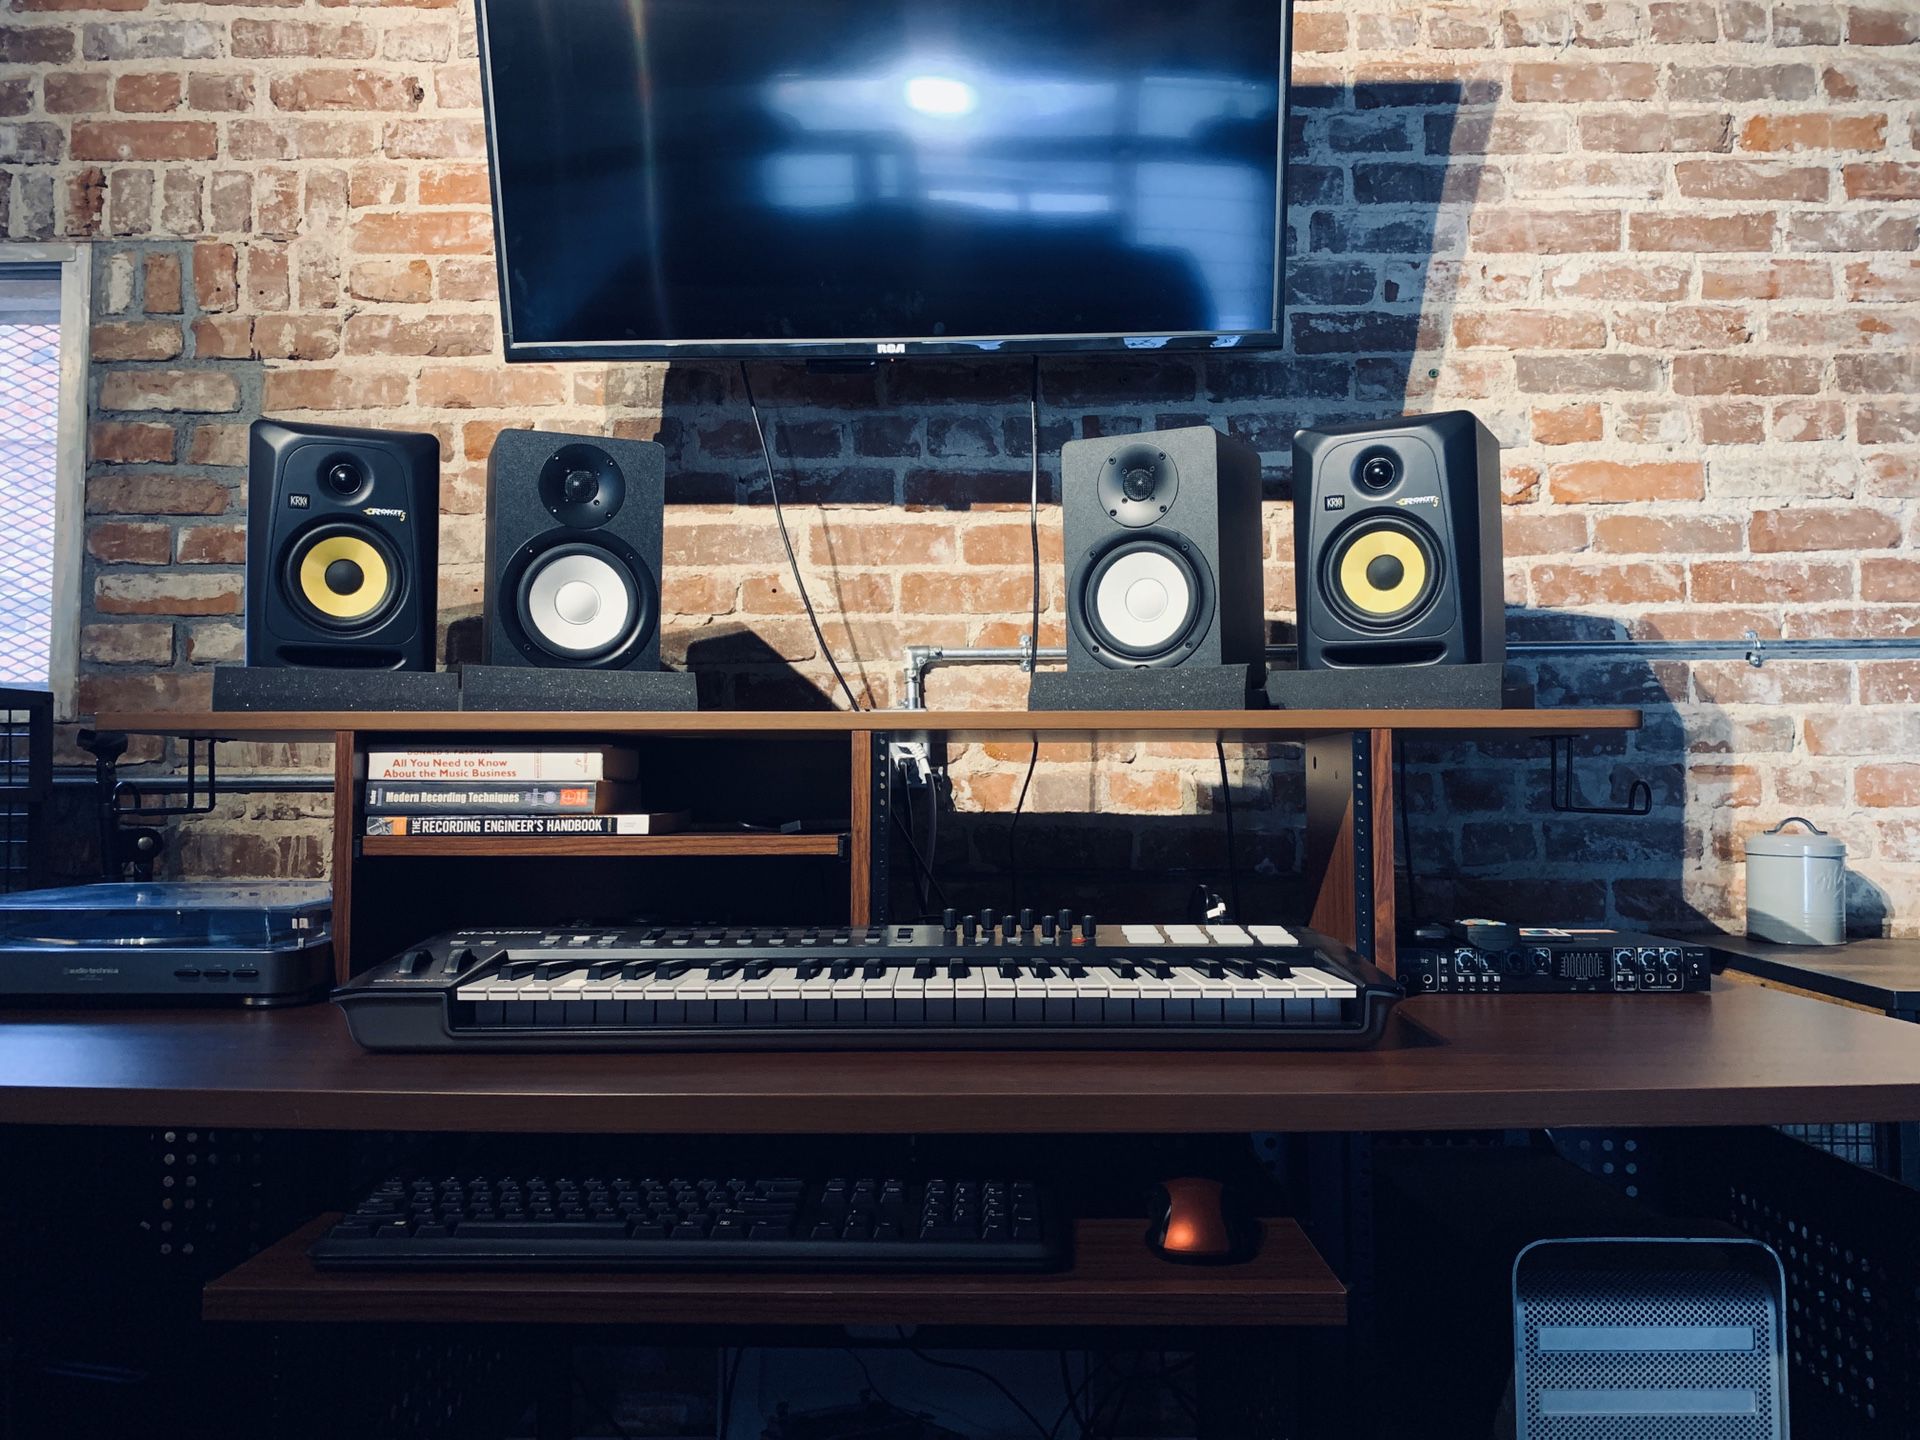 Producer desk Studio RTA Cherry color for Sale in Los Angeles, CA - OfferUp